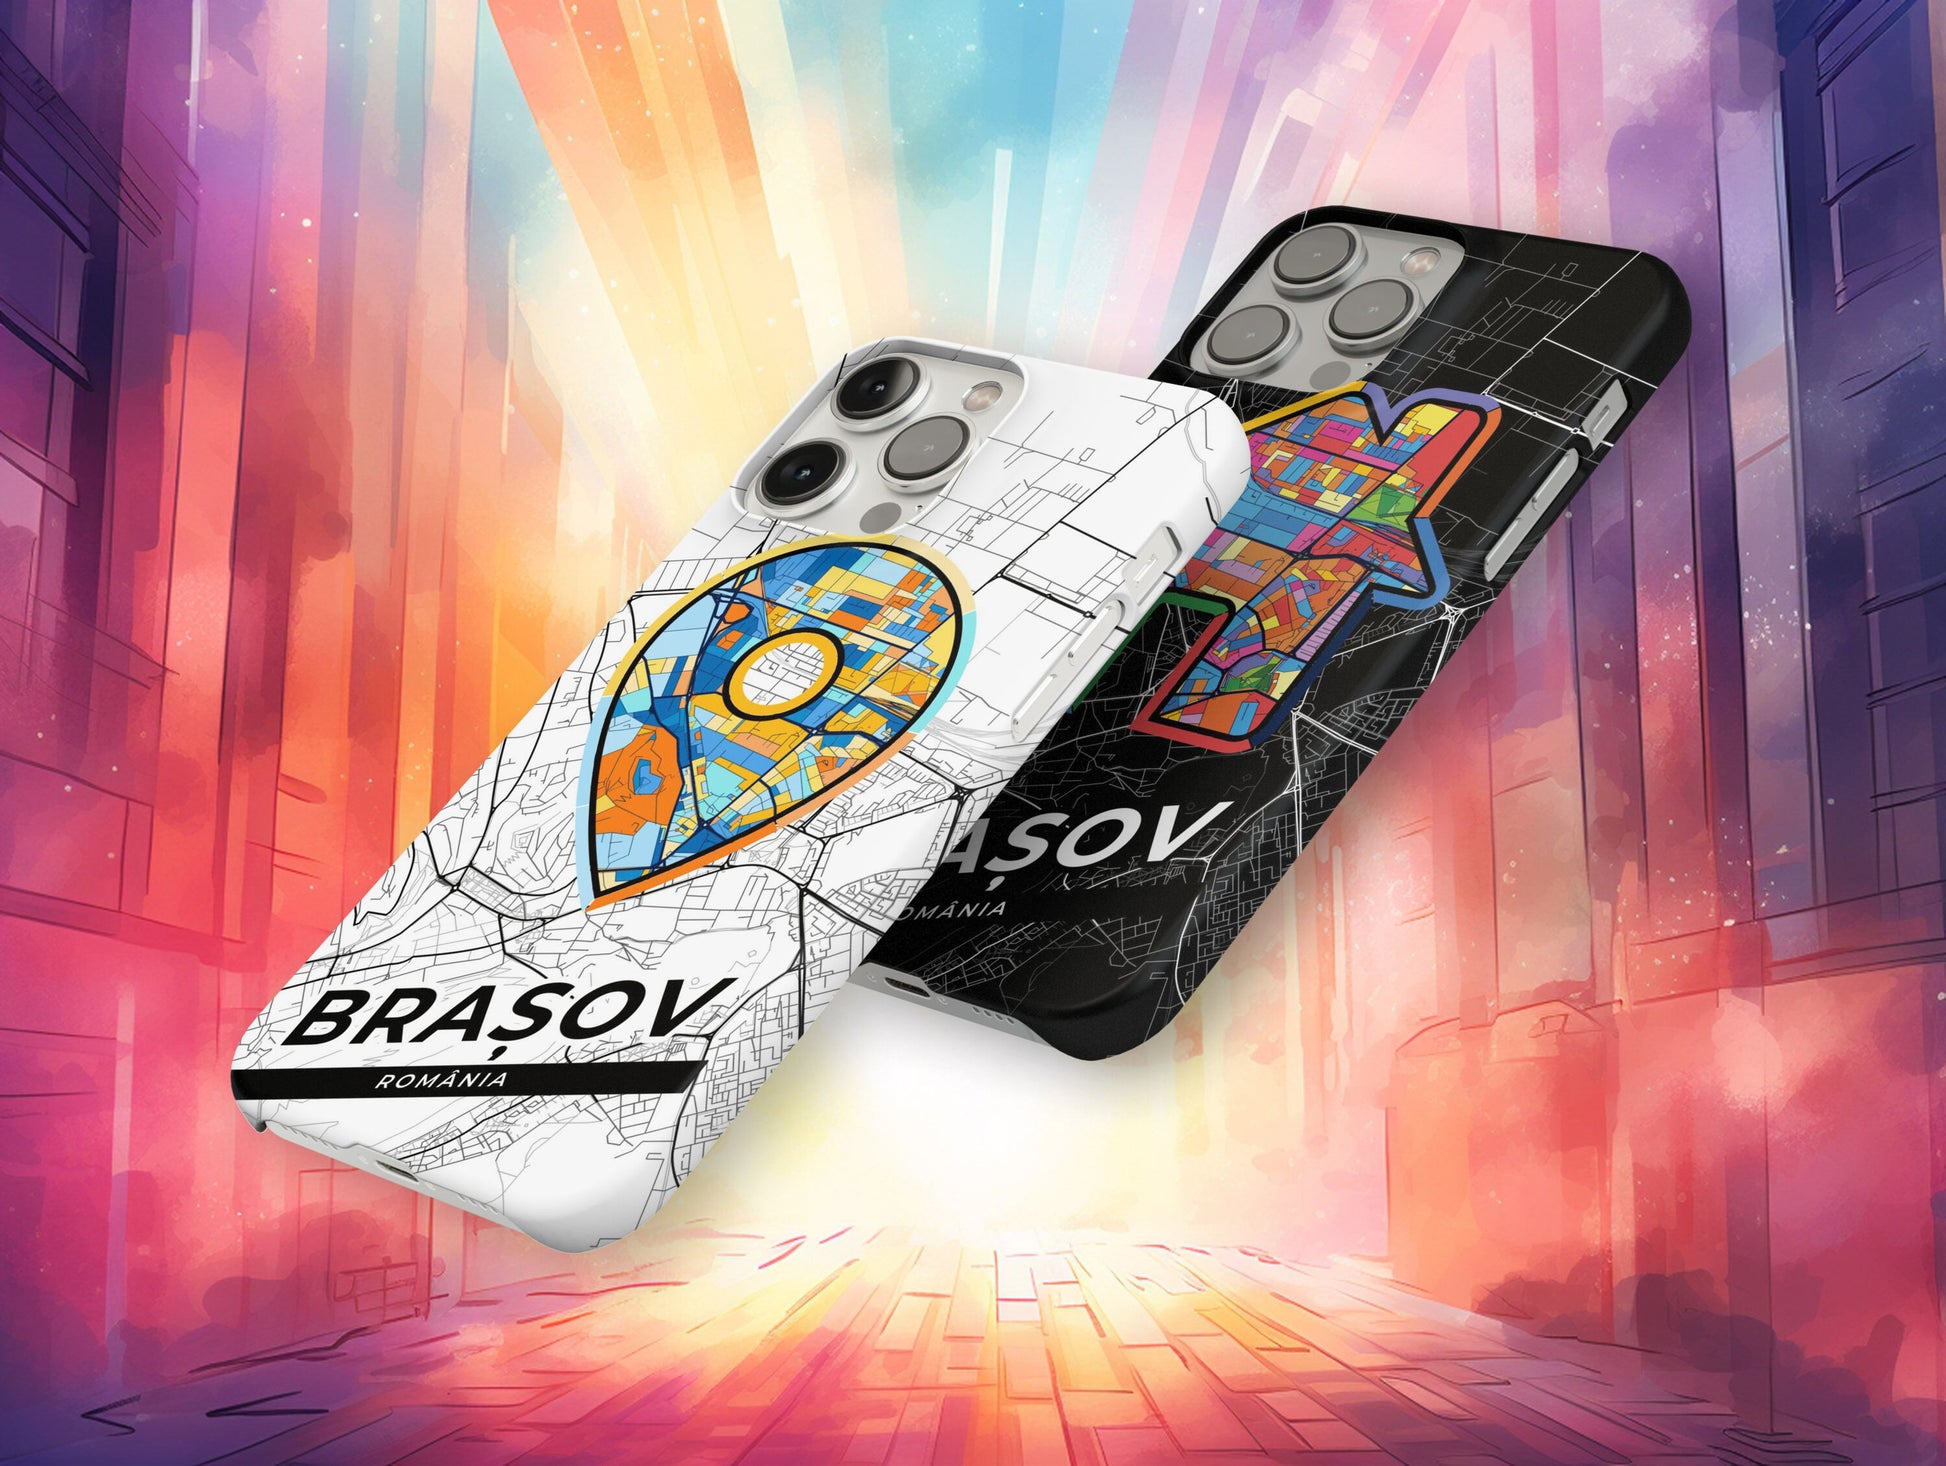 Brașov Romania slim phone case with colorful icon. Birthday, wedding or housewarming gift. Couple match cases.